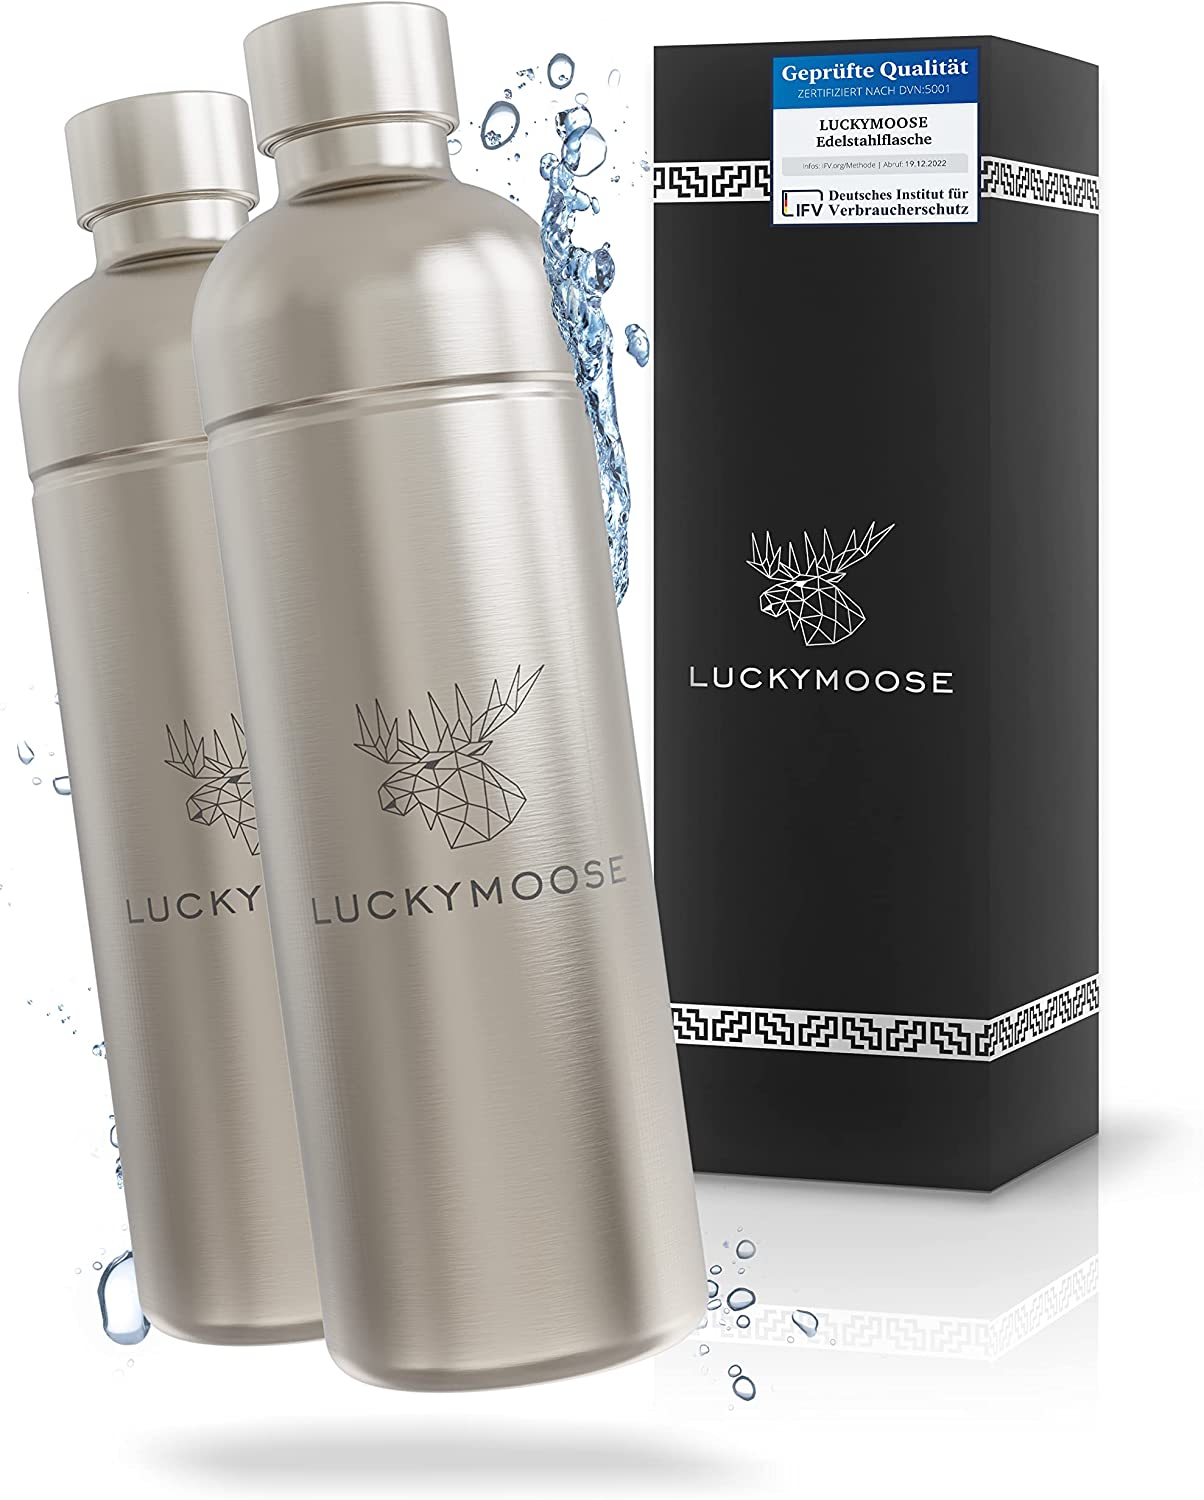 Luckymoose® 2x stainless steel bottle 1L compatible with Aarke & Philips water bubble - premium stainless steel drinking bottle, ideal for home, outdoor & office (2x stainless steel)